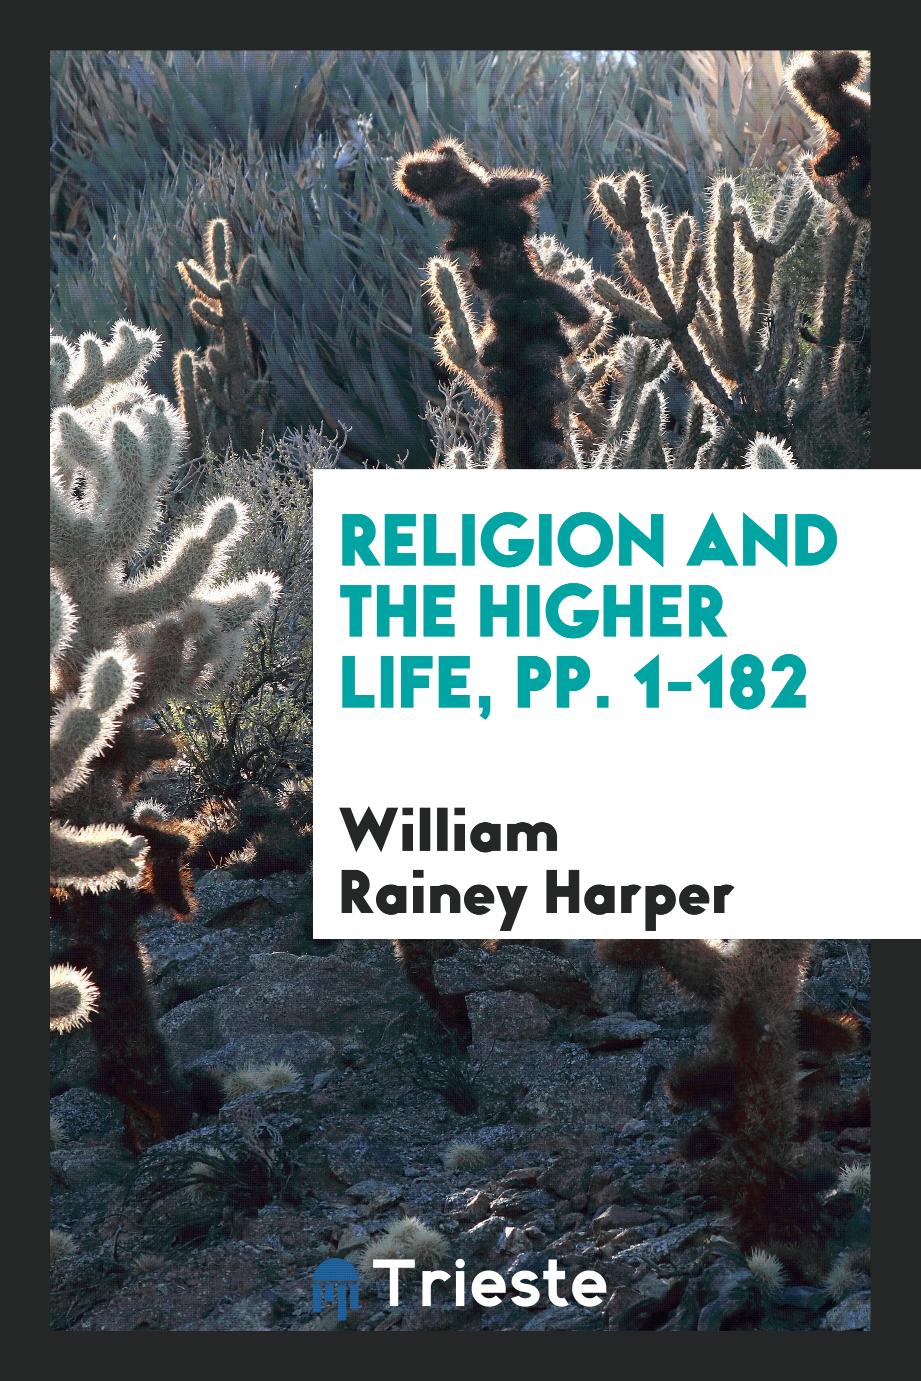 Religion and the Higher Life, pp. 1-182